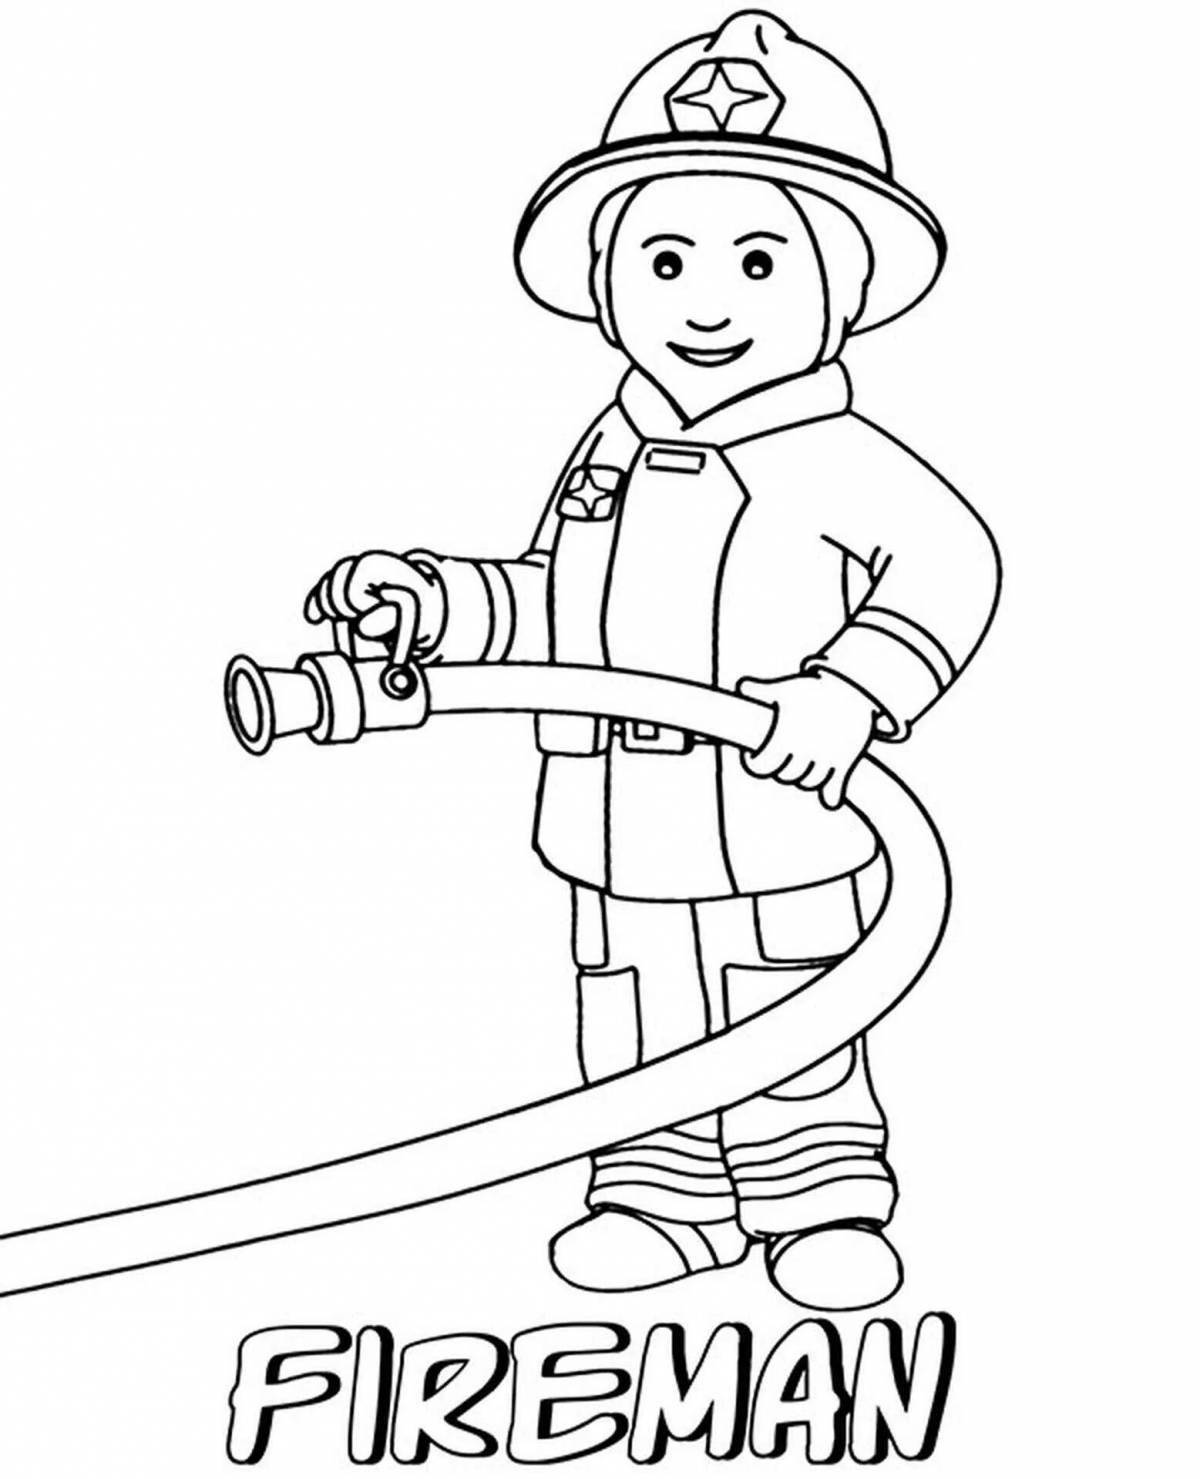 Cute fireman coloring pages for kids